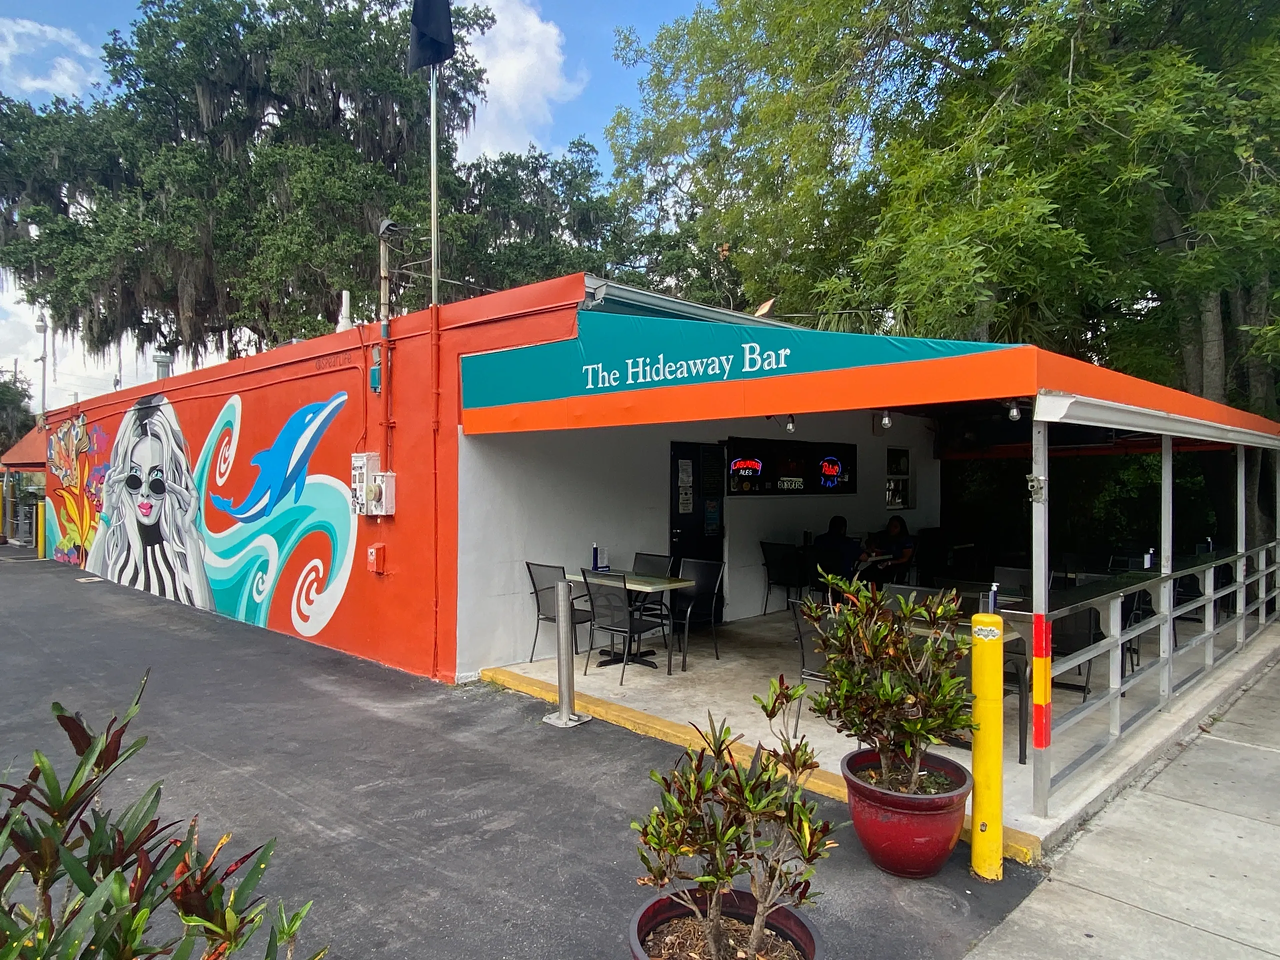 The Hideaway Bar 
516 Virginia Dr., Orlando
This dive with a breezy patio has been a consistent hometown presence for decades. Guests can grab brews, bar bites before getting into some pool and pinball.